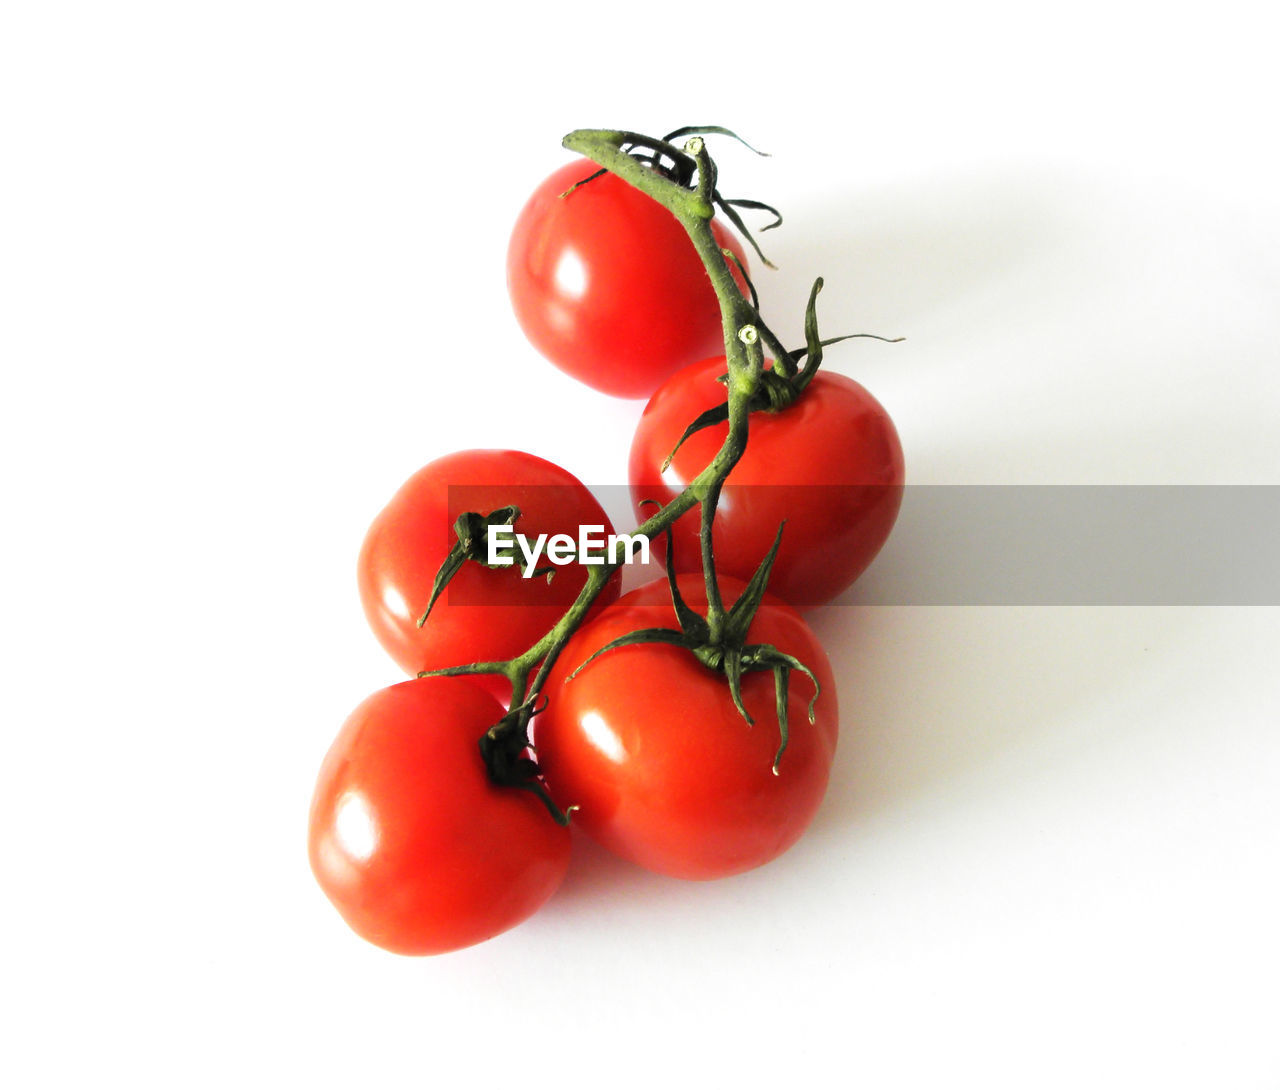 CLOSE-UP OF TOMATOES AGAINST WHITE BACKGROUND